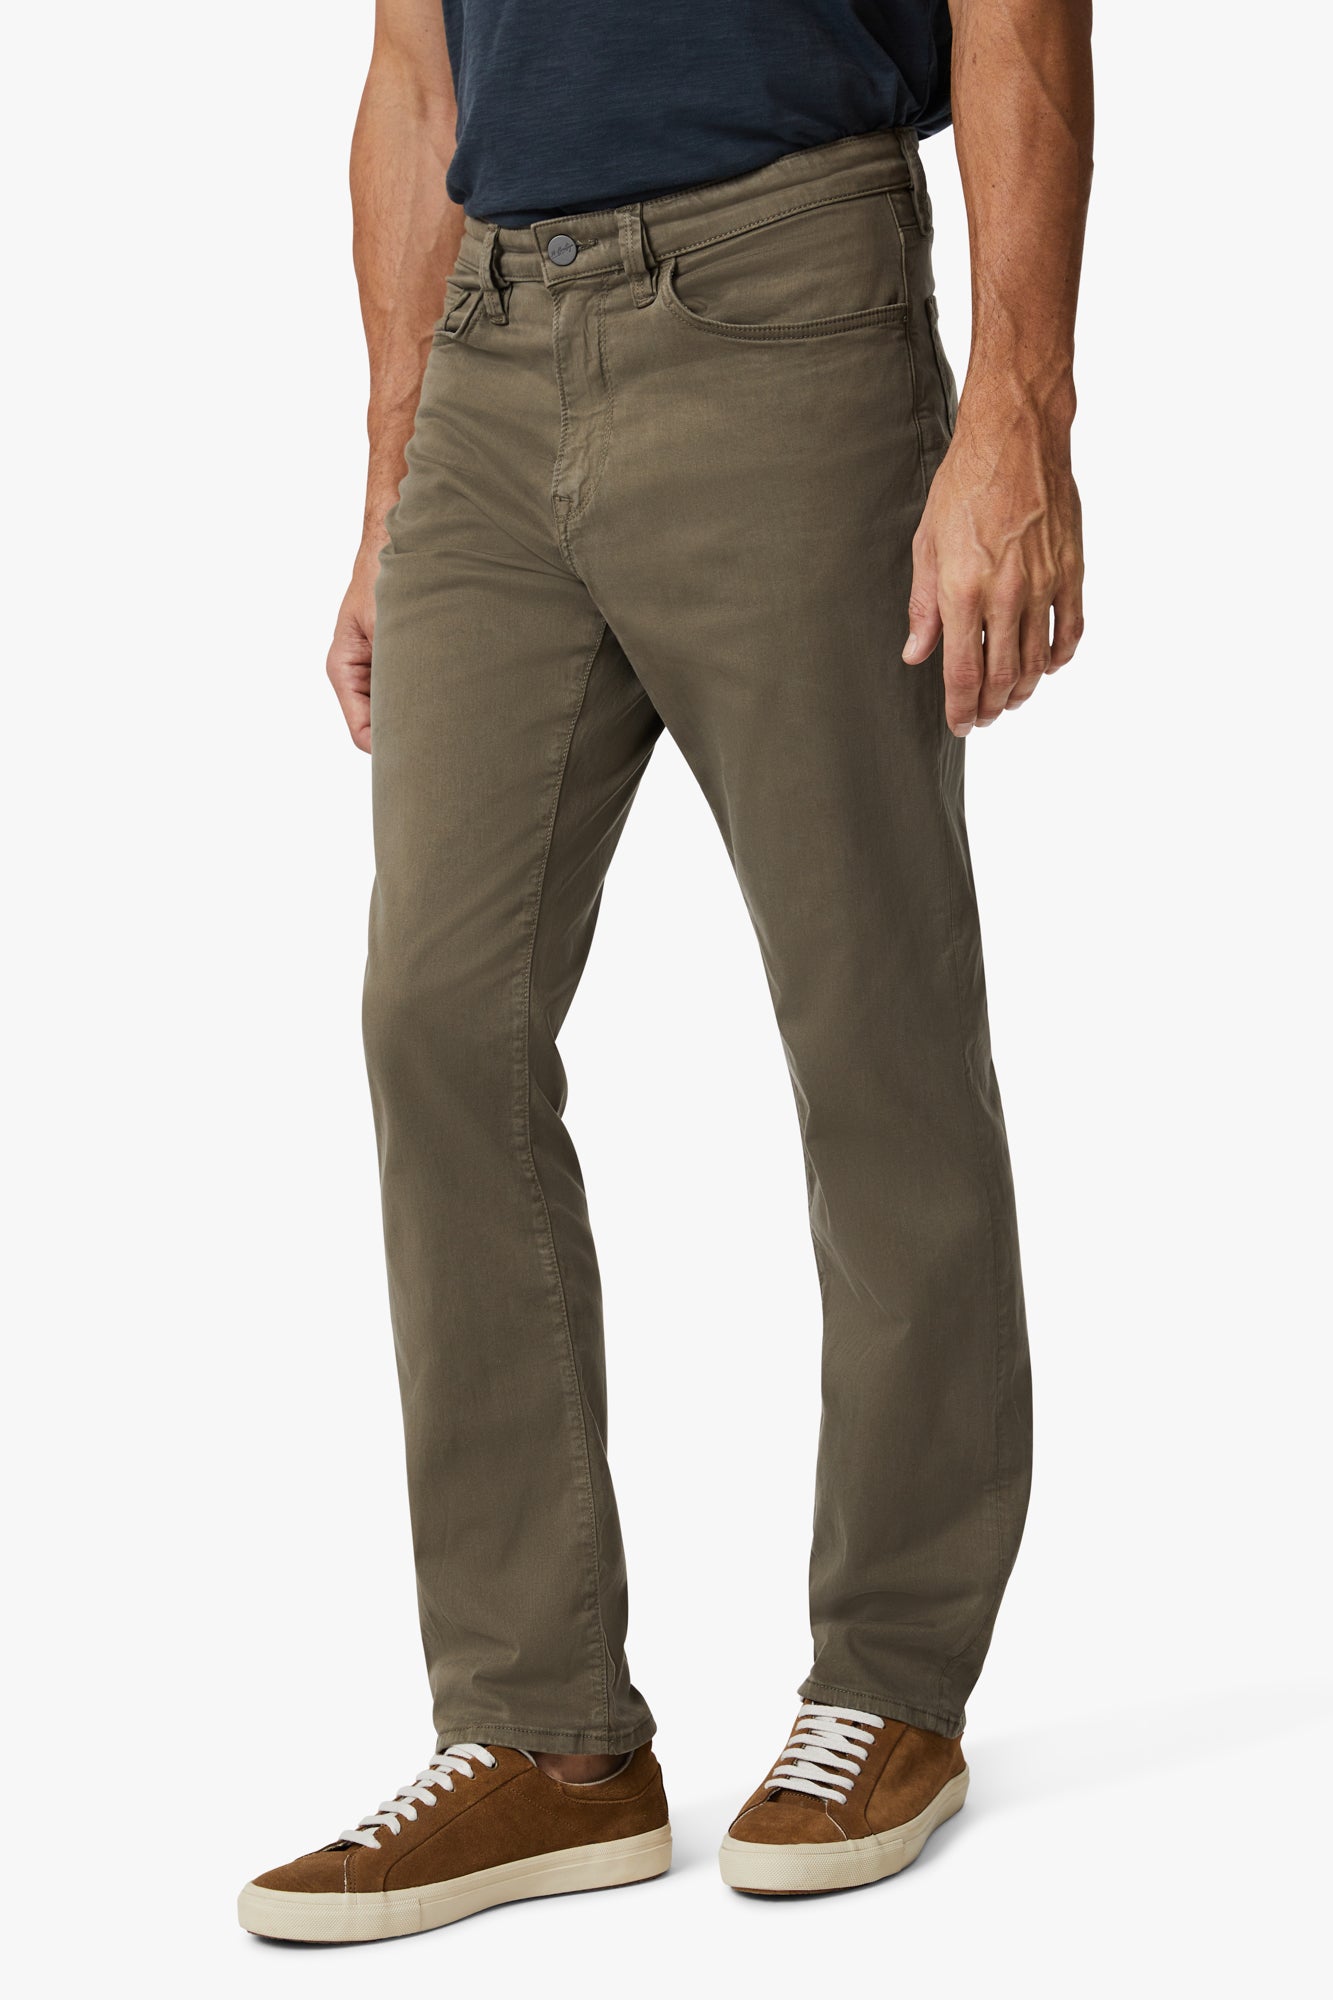 Charisma Relaxed Straight Leg Pants Canteen Twill Image 3